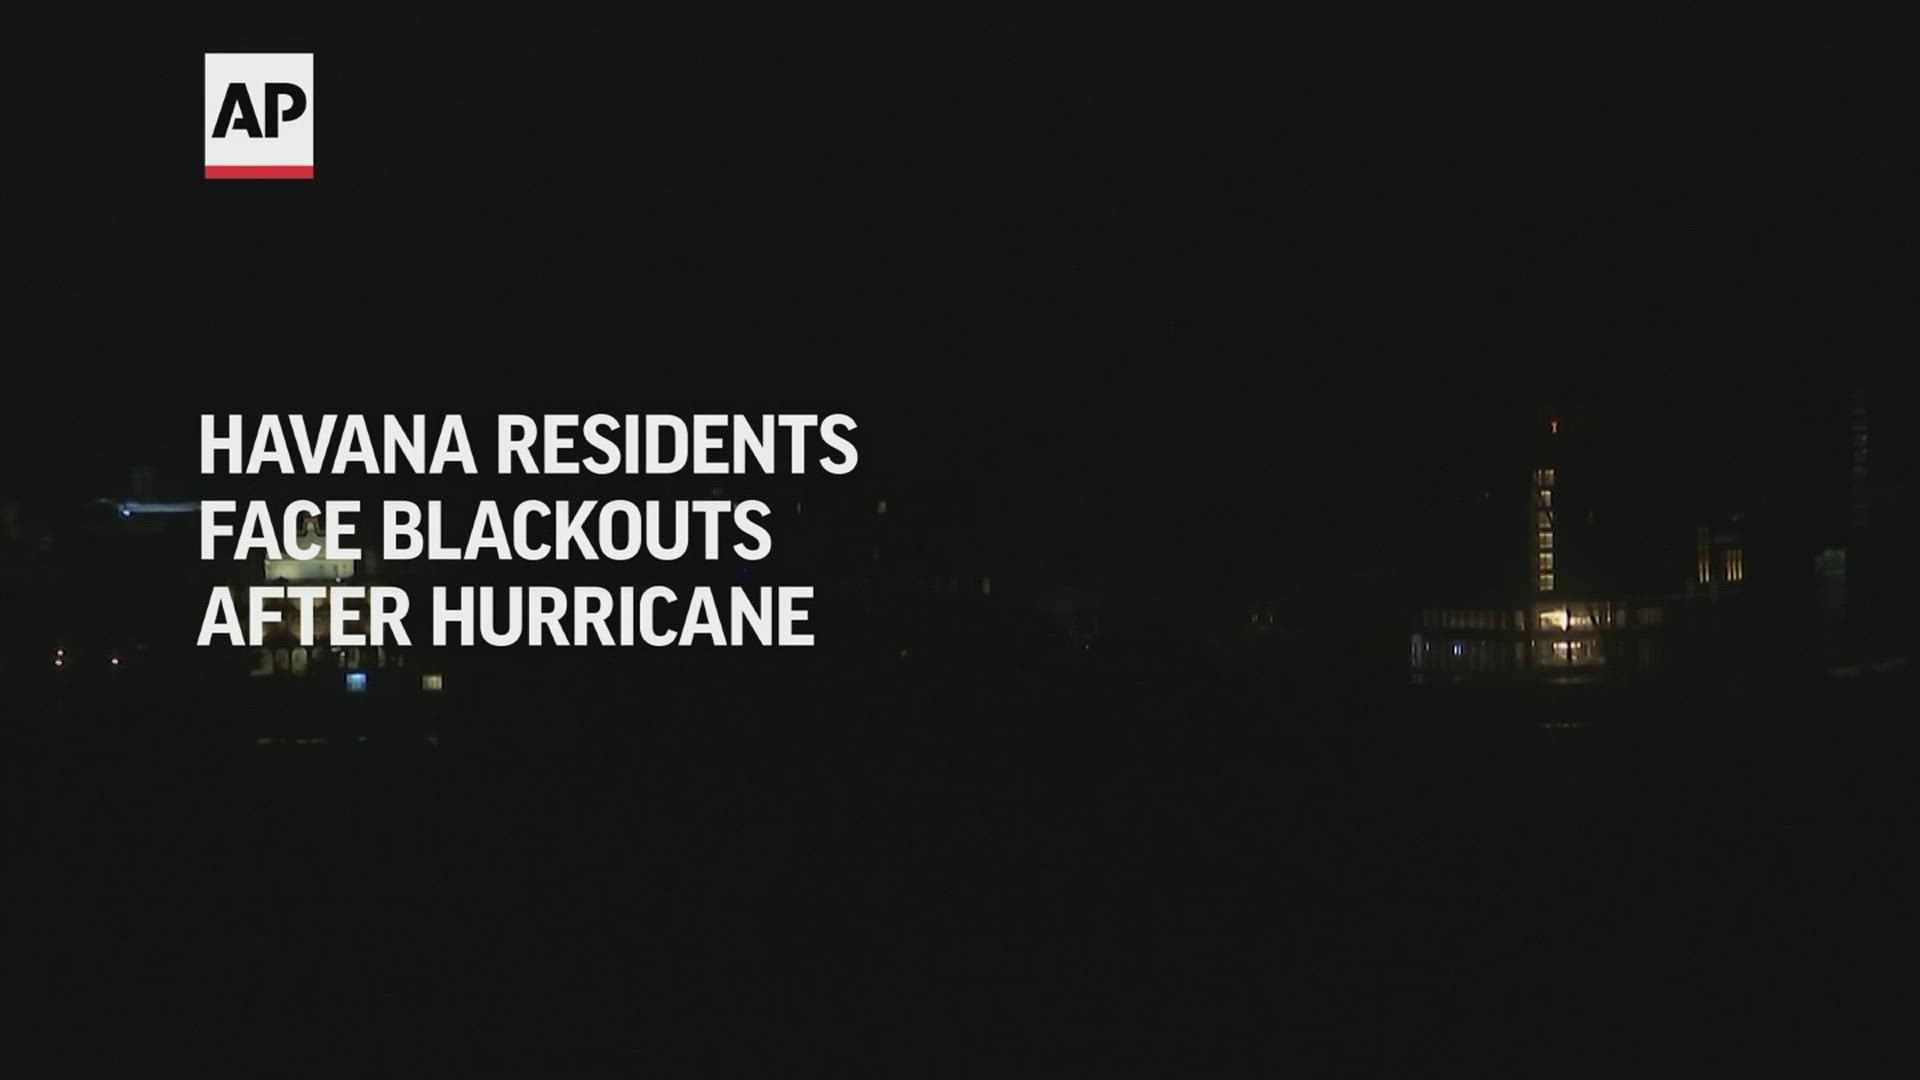 Cuba experienced a nationwide blackout after Hurricane Ian lashed through the island. Authorities say the grid has been partially restored. Video credit: AP